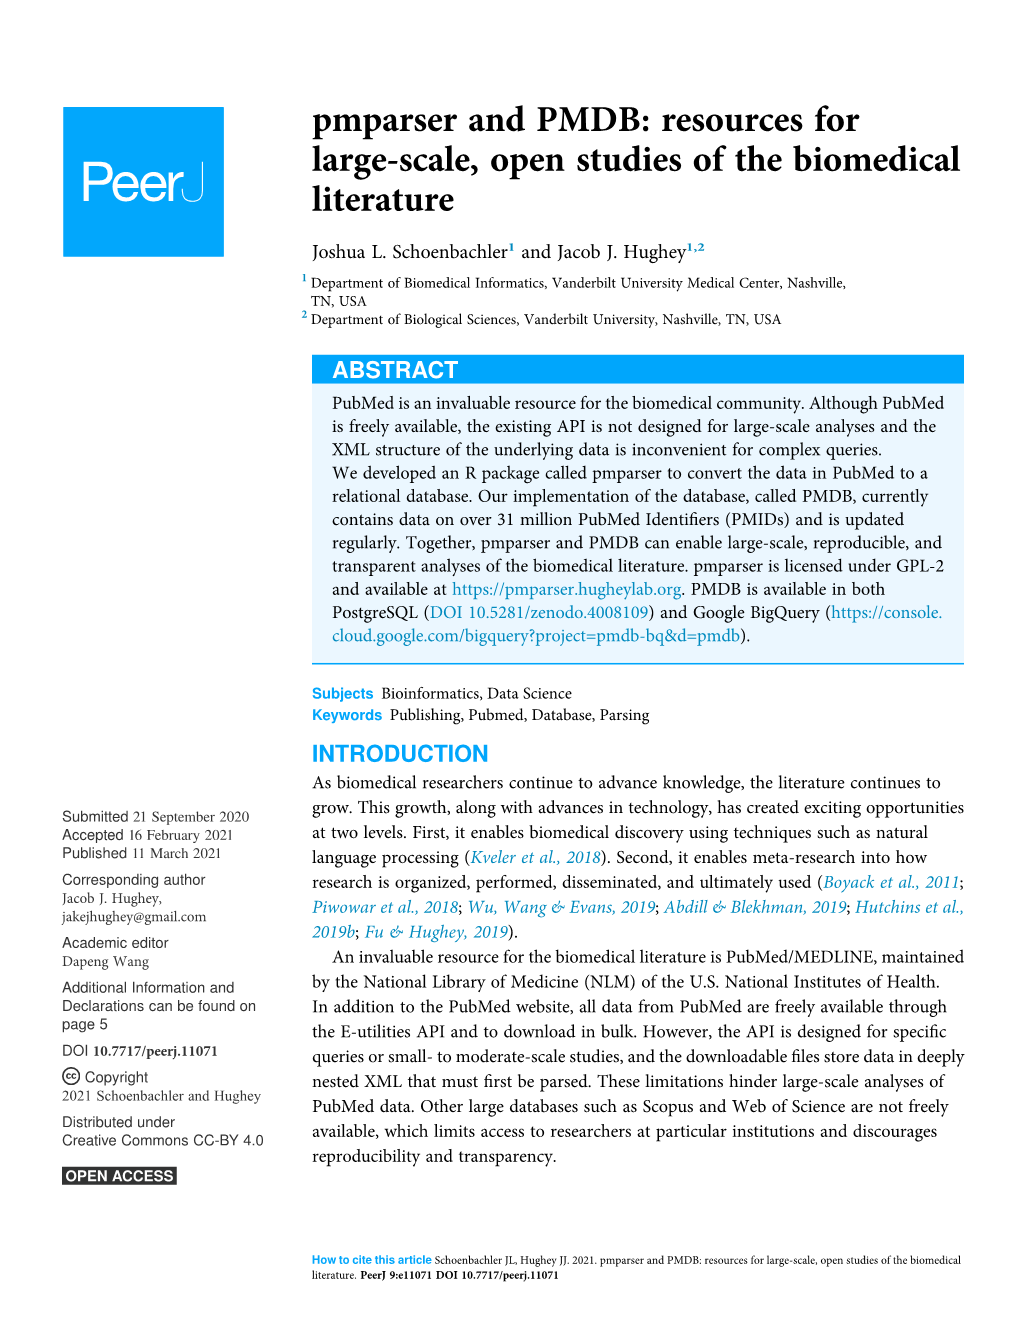 Pmparser and PMDB: Resources for Large-Scale, Open Studies of the Biomedical Literature